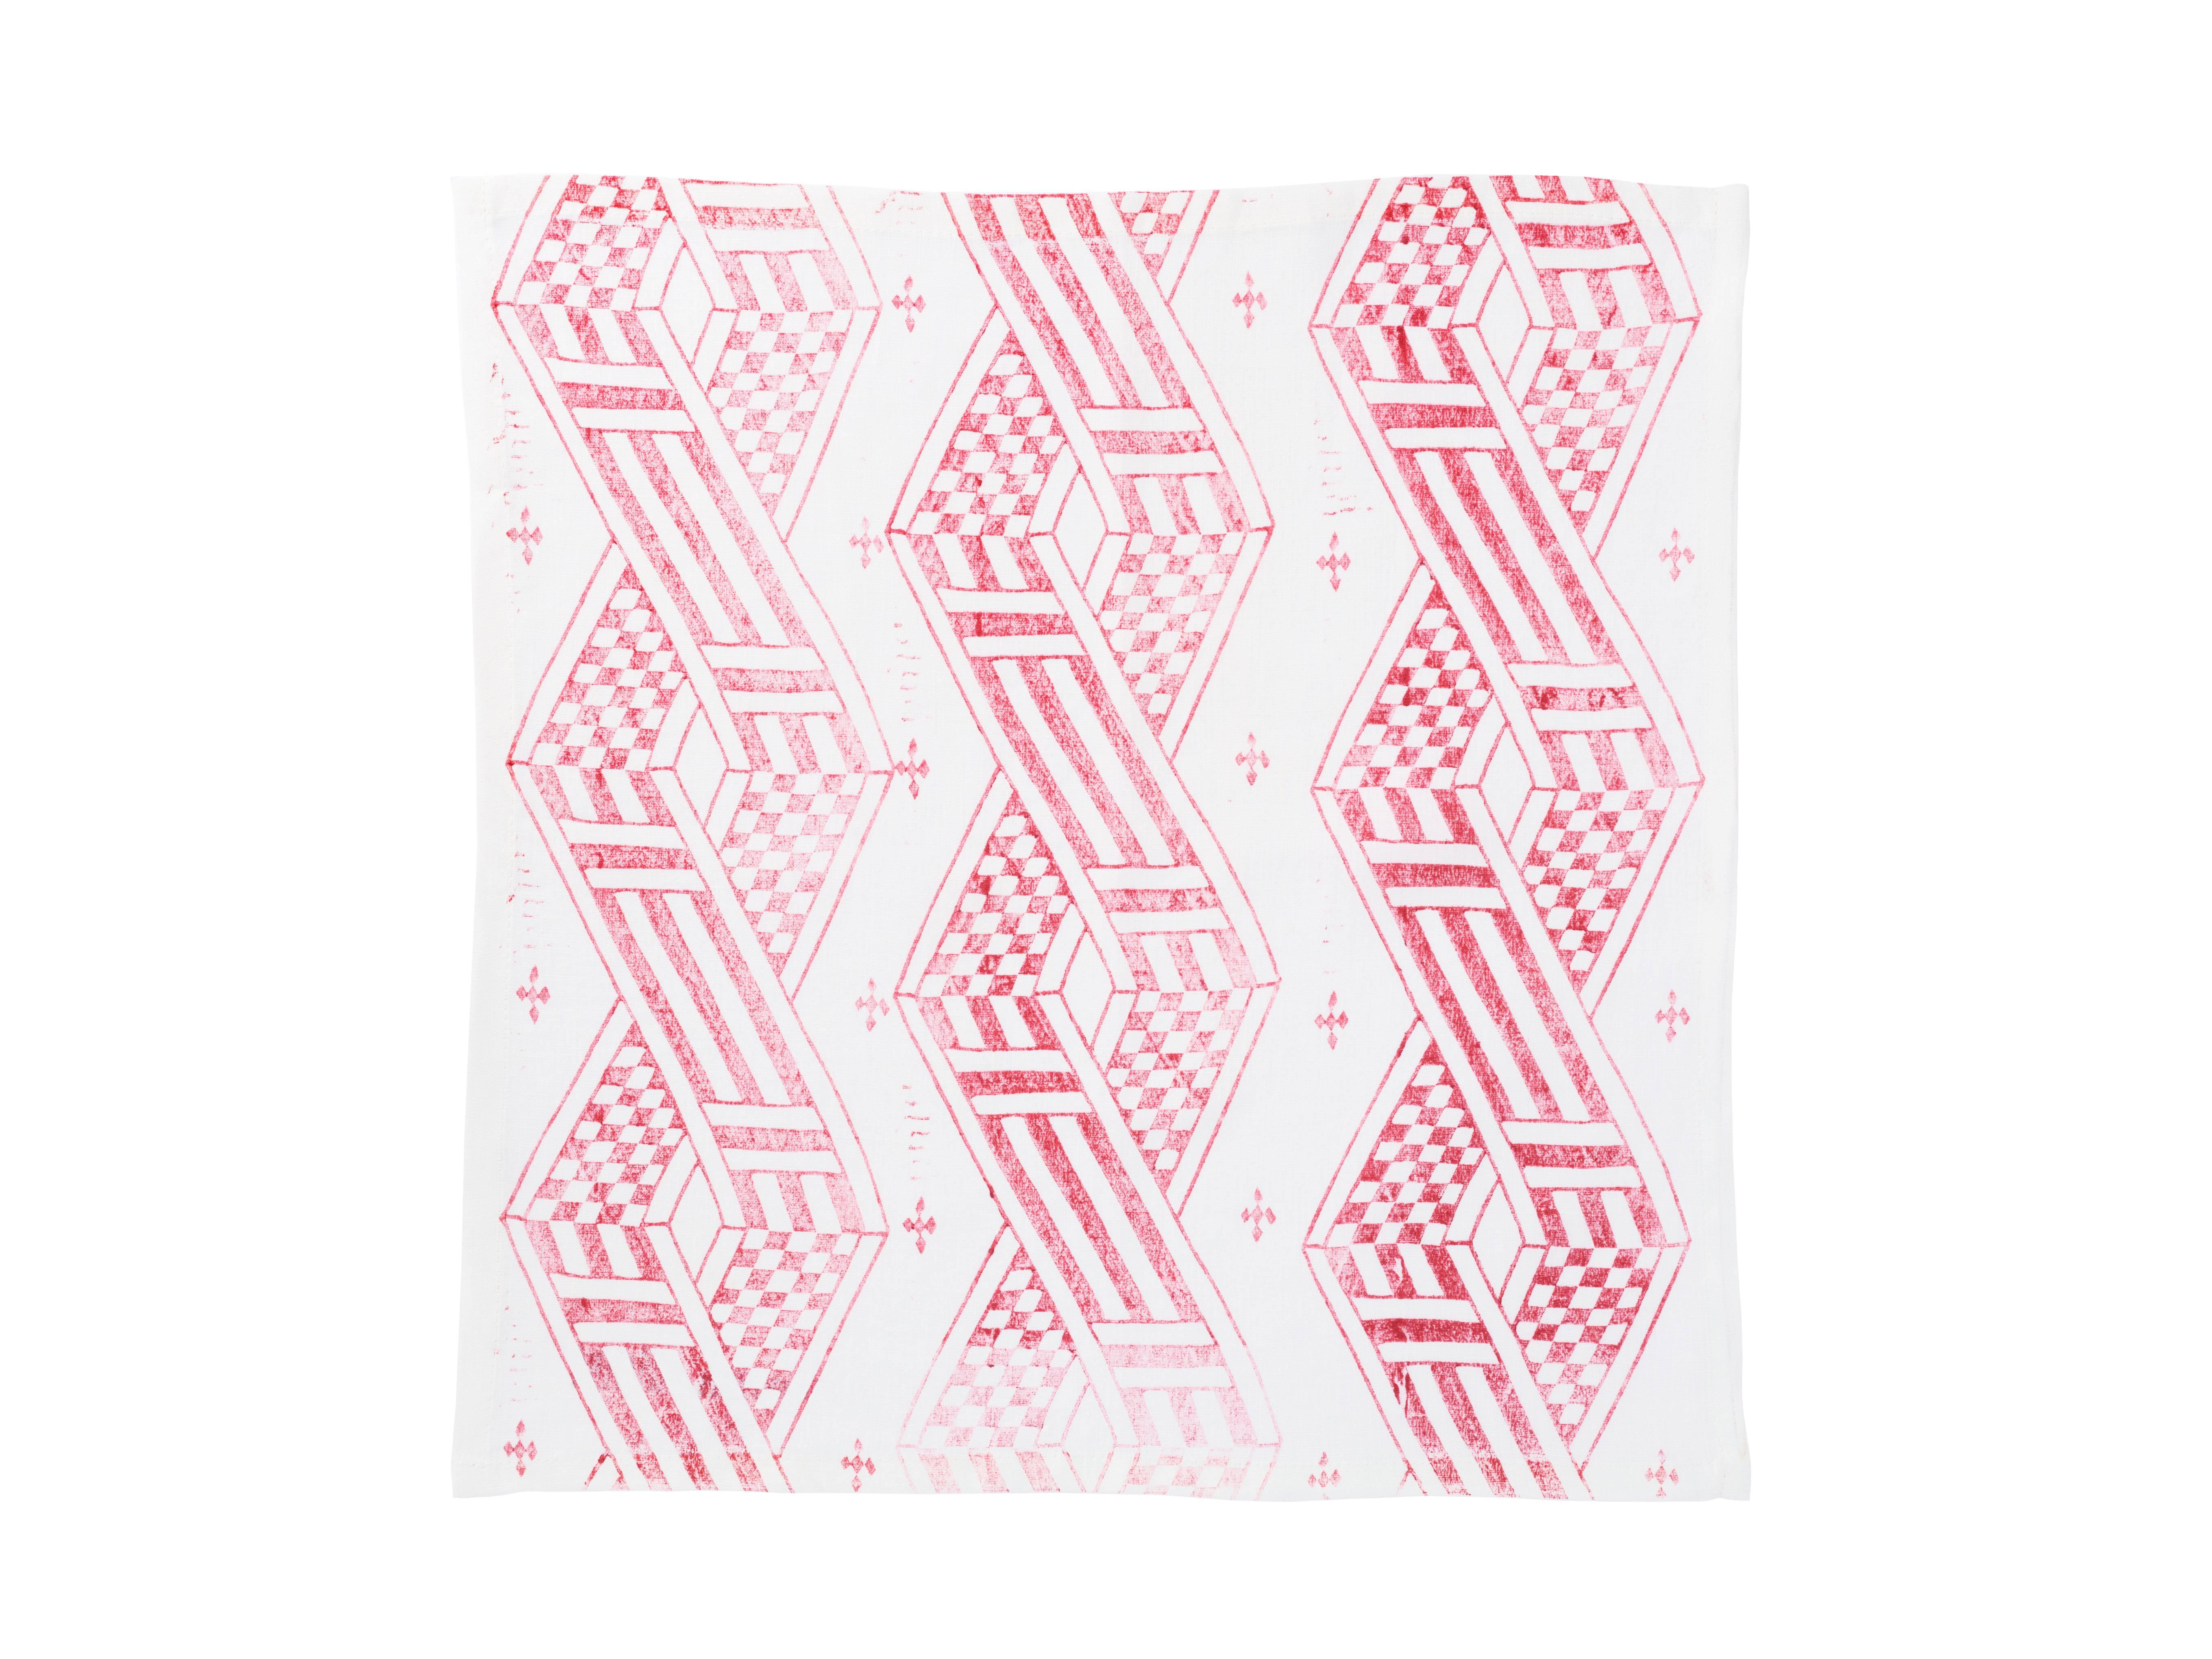 Block print napkins in pink geometric pattern. 
These napkins are hand printed using unique techniques and patterns on linen fabrics by the Hungarian designer Zsuzsanna Nyul. All natural dye. 
Each set consists of four napkins.